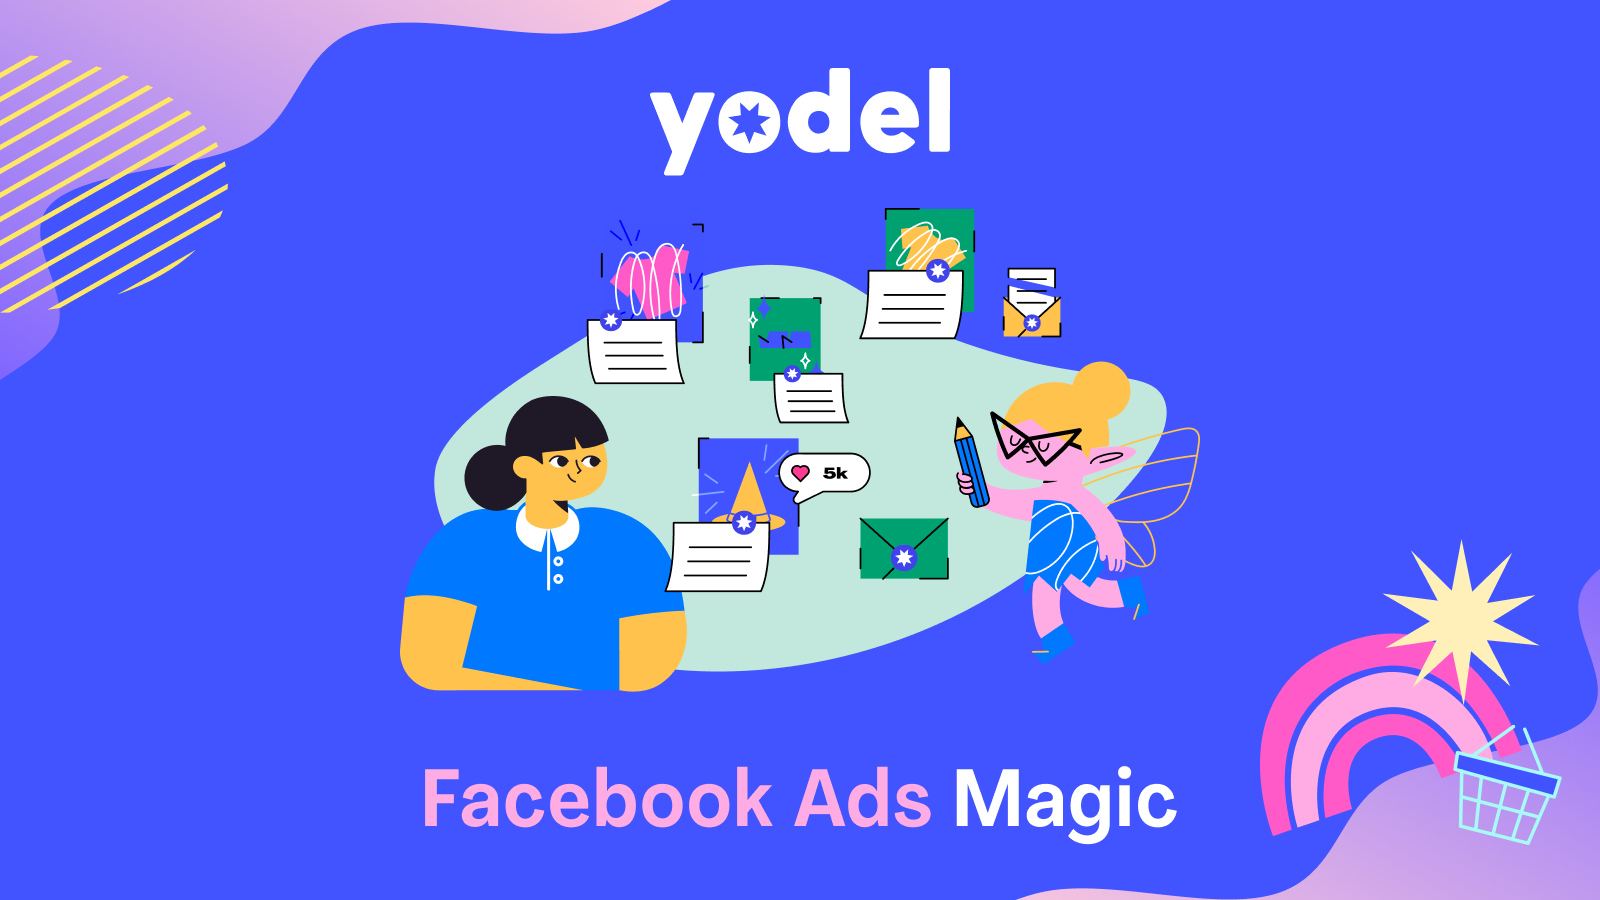 Facebook Ads Magic by Yodel